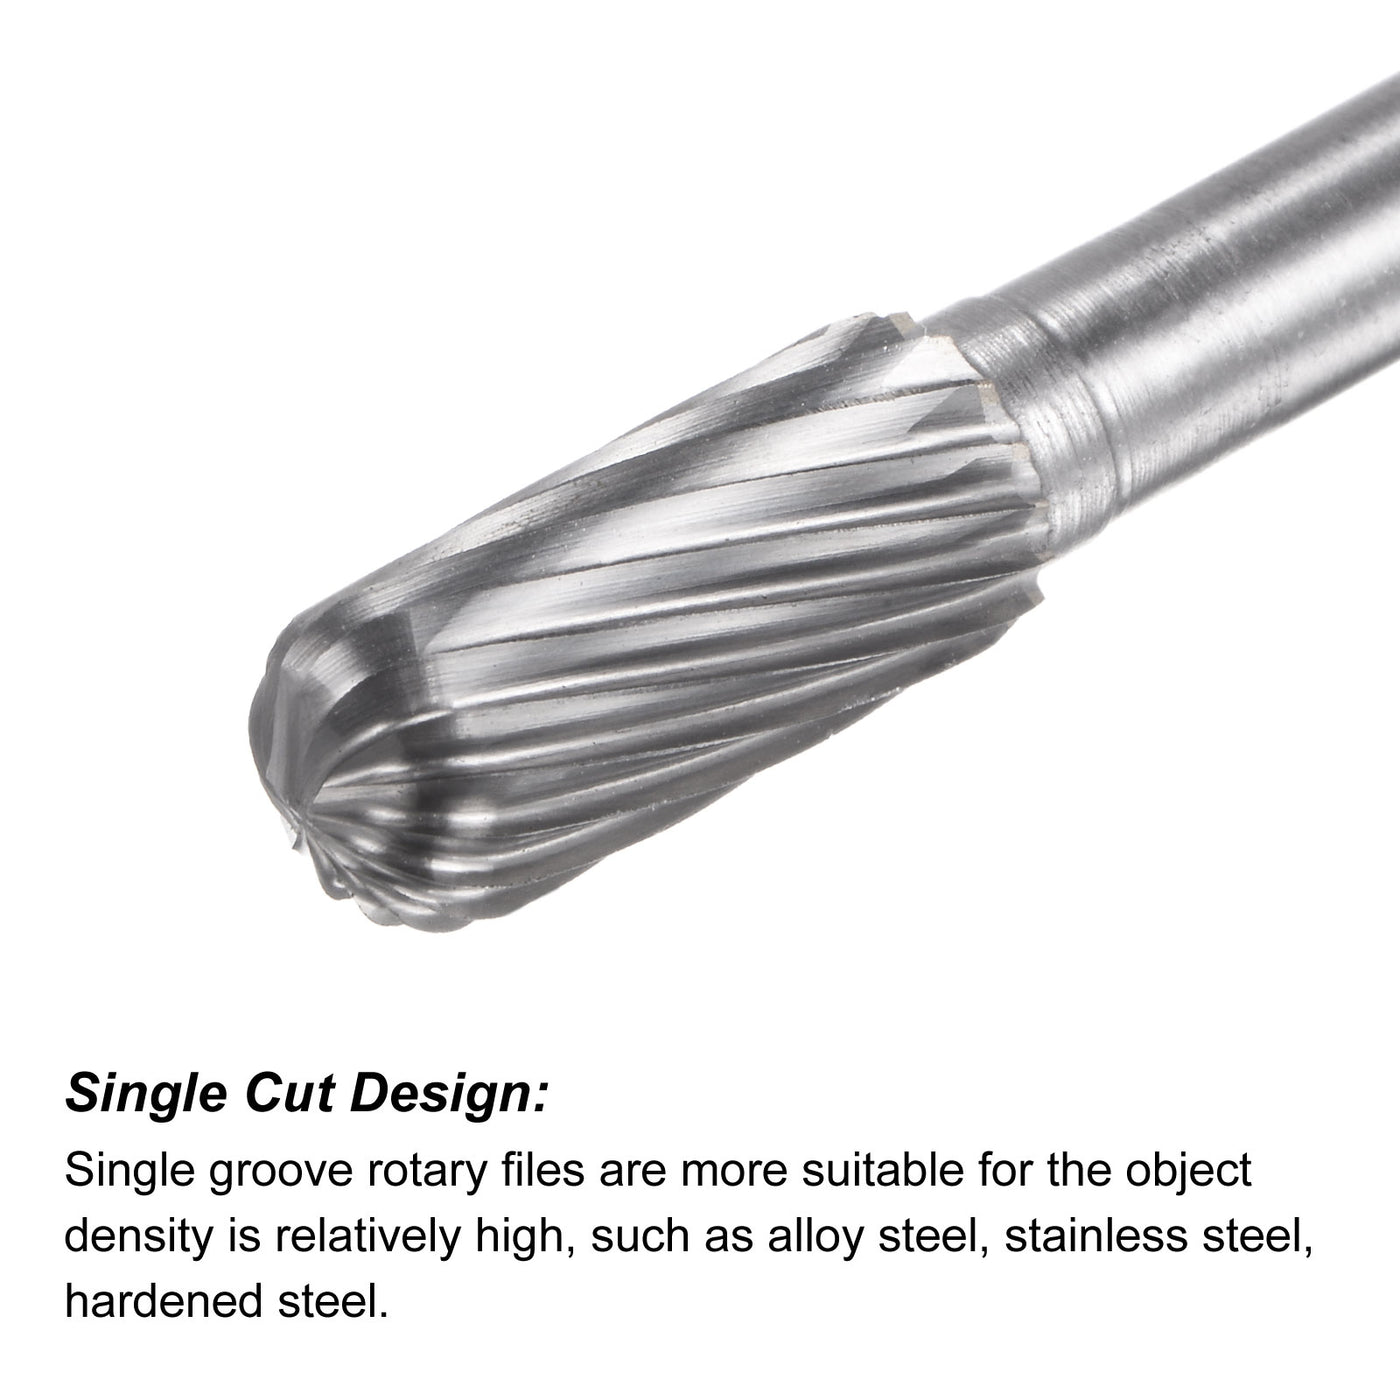 Uxcell Uxcell 10mmx150mm 6mm Shank Single Cut Cylinder with Ball Nose Carbide Tip Rotary File